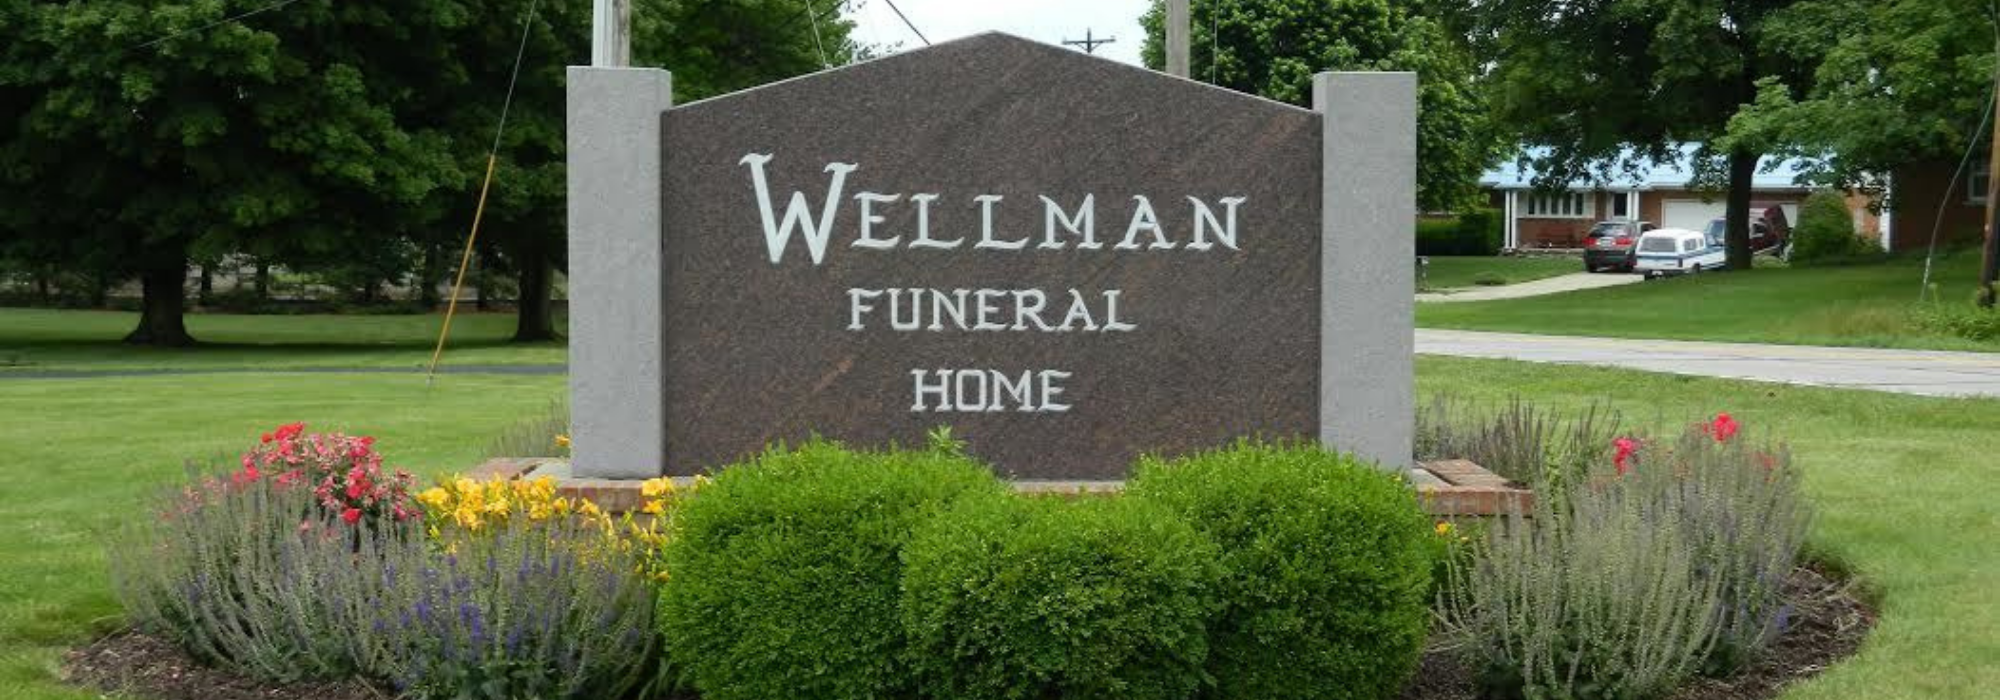 Wellman Funeral Home Headstone Sign 